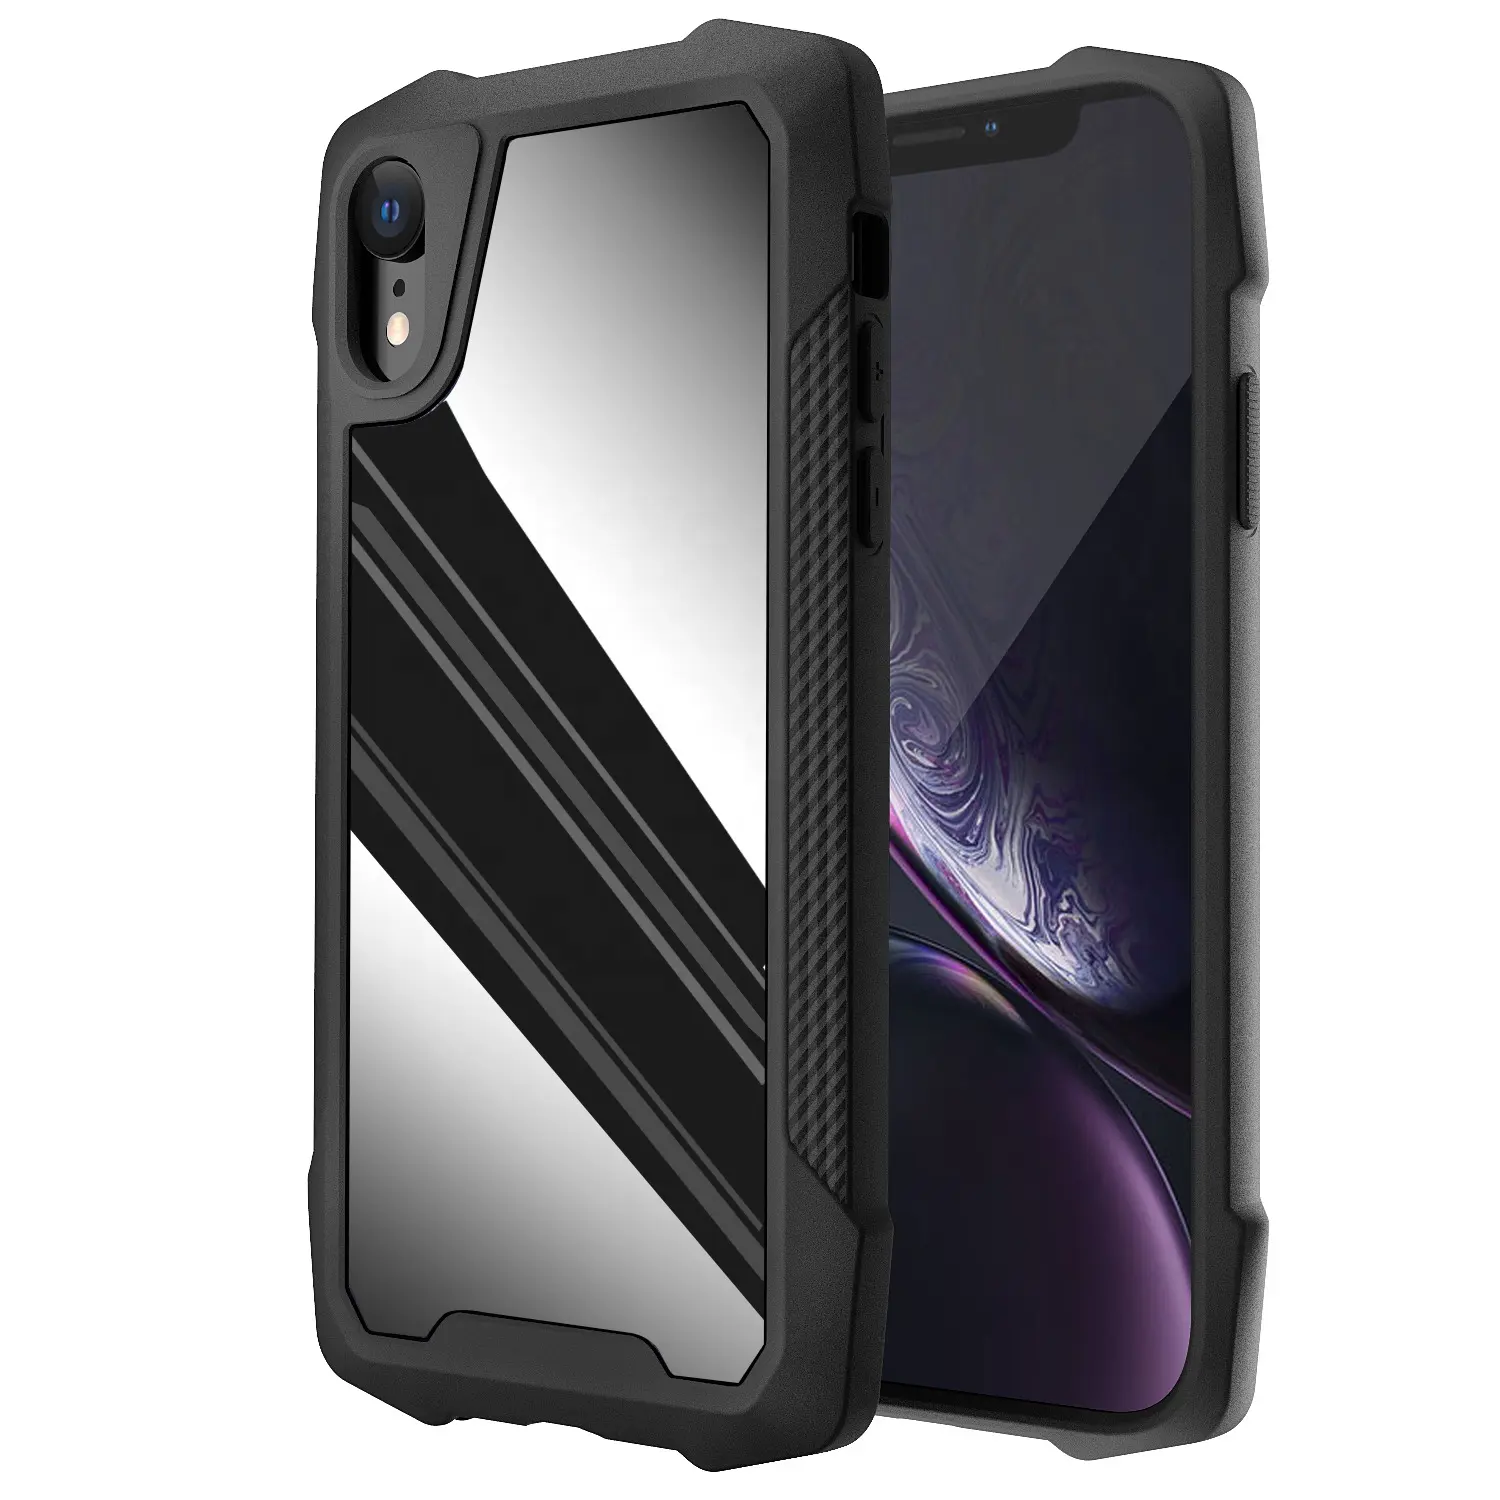 Shockproof Armor Stainless Steel Metal TPU Mobile Phone Bags Case For Samsung Galaxy Note 20 Ultra Note 10 Plus